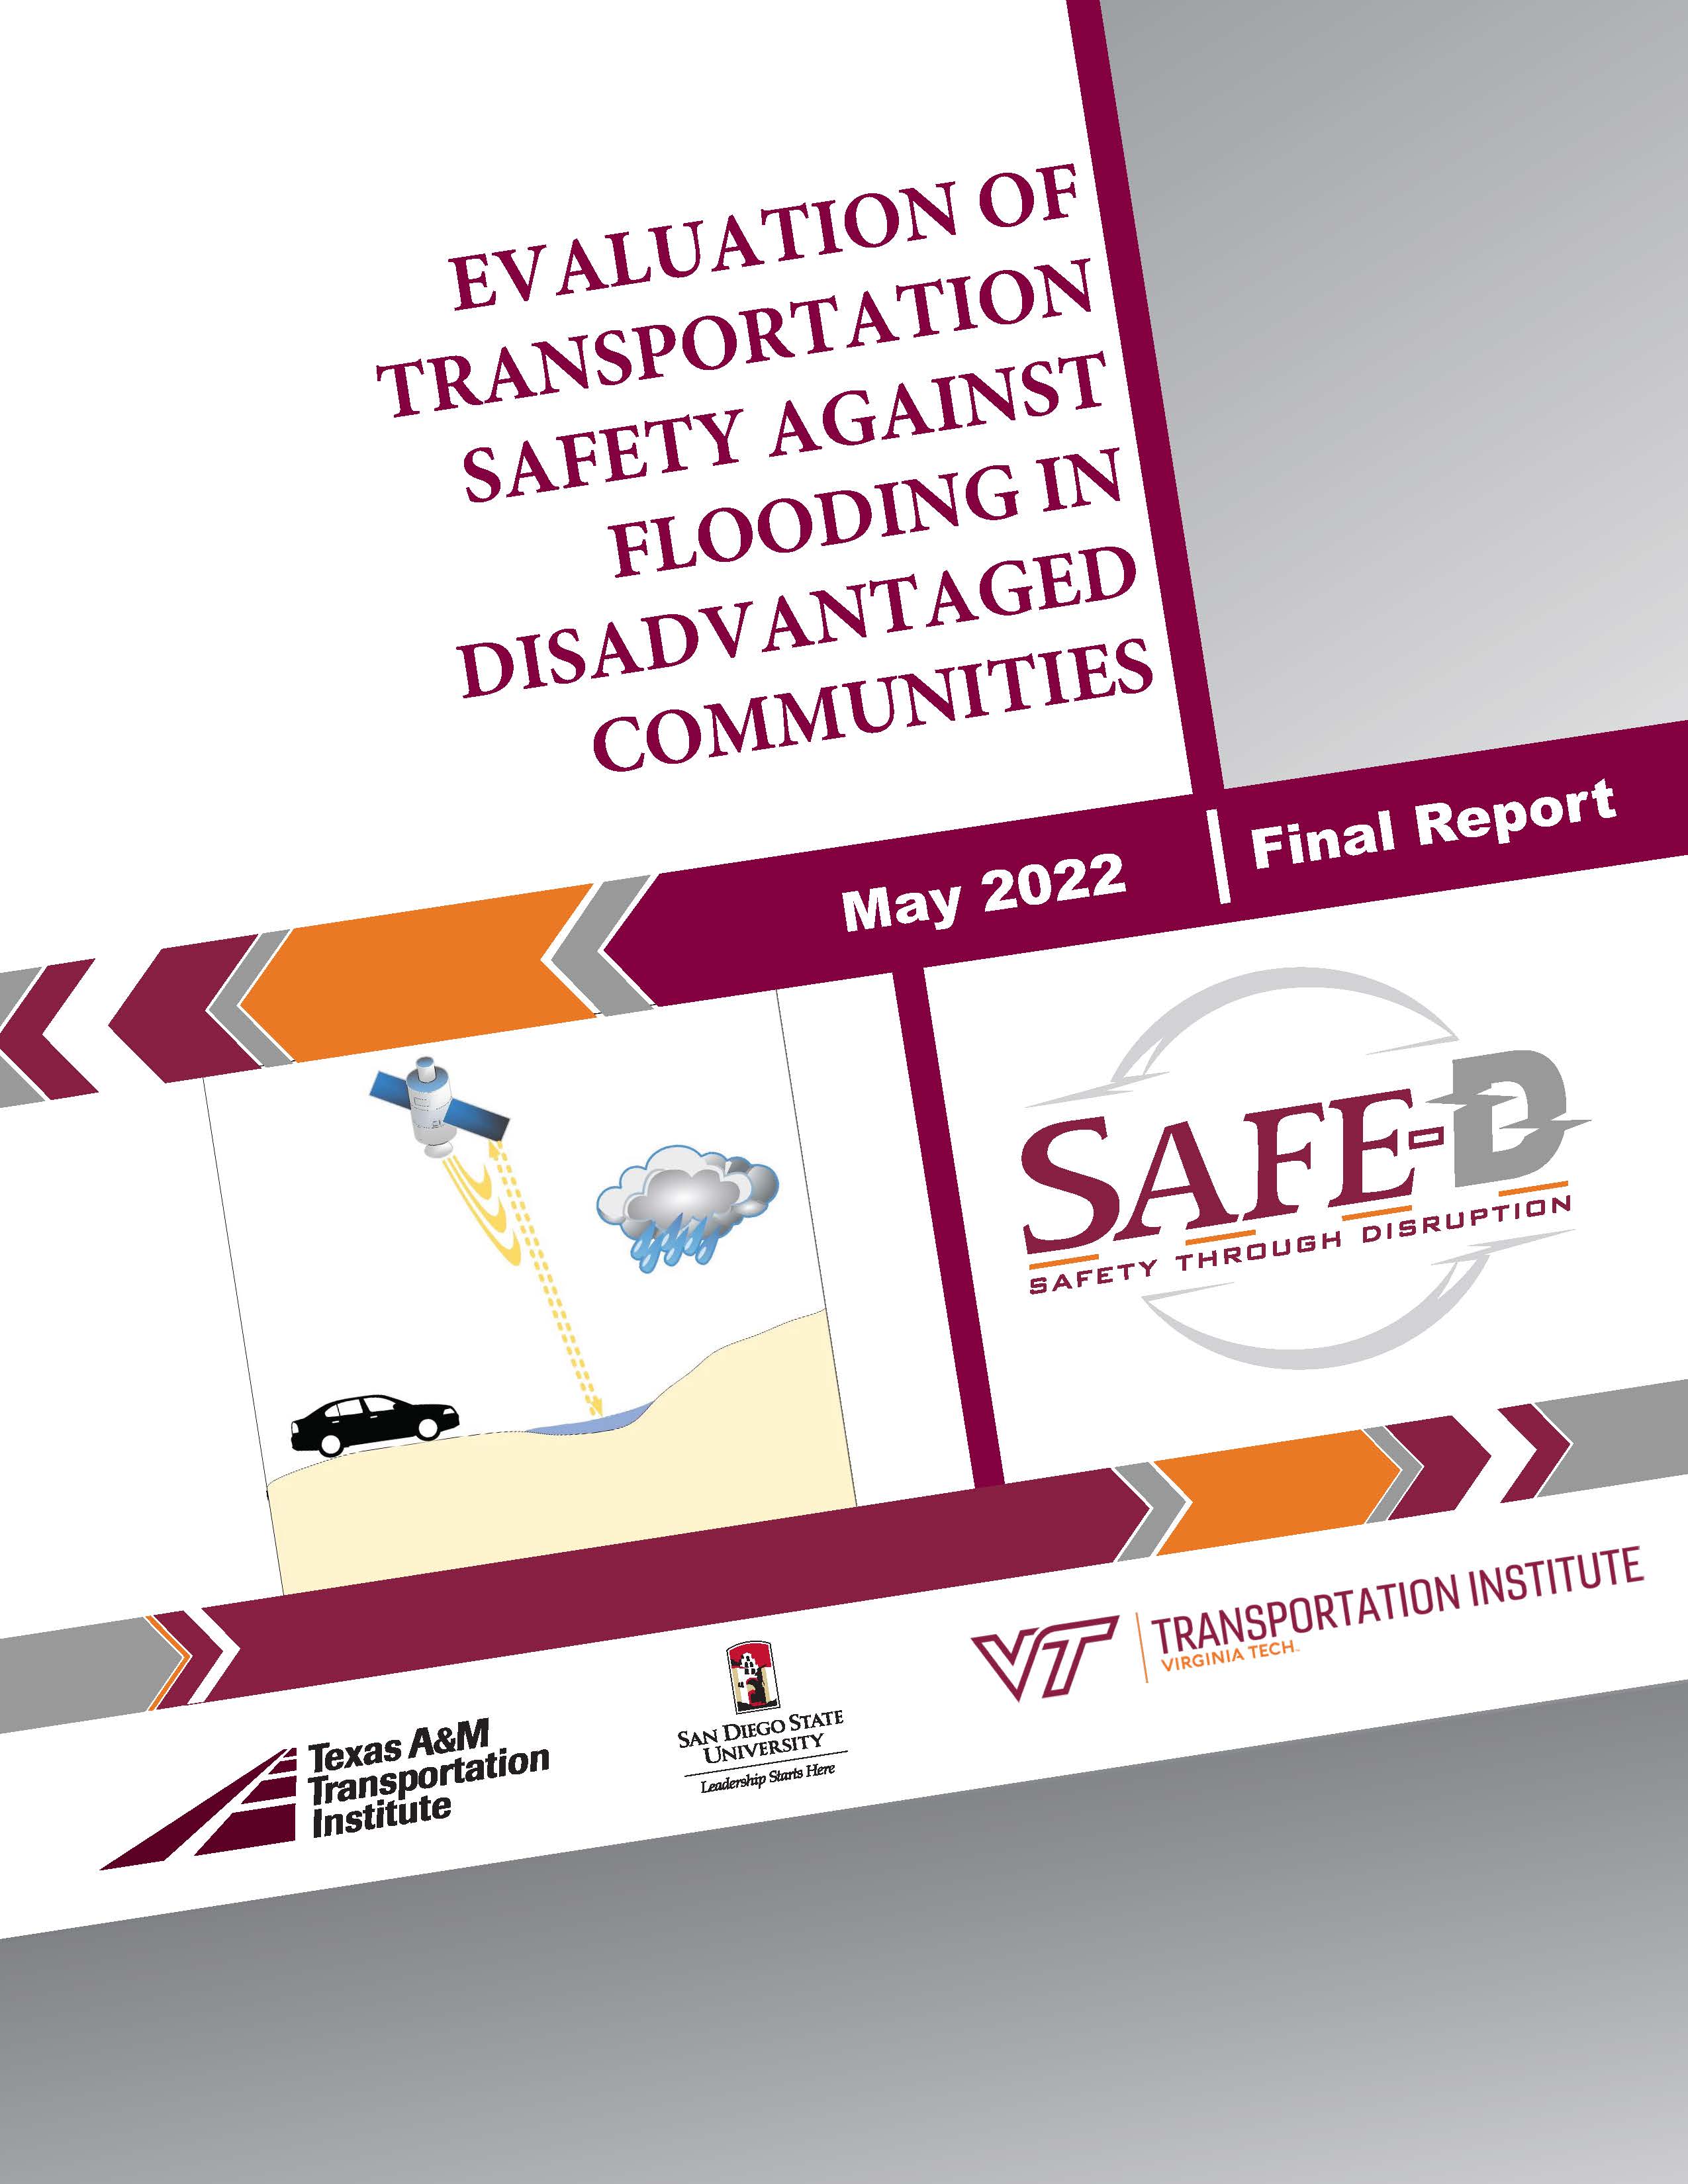 Evaluation of transportation safety against flooding in disadvantaged communities